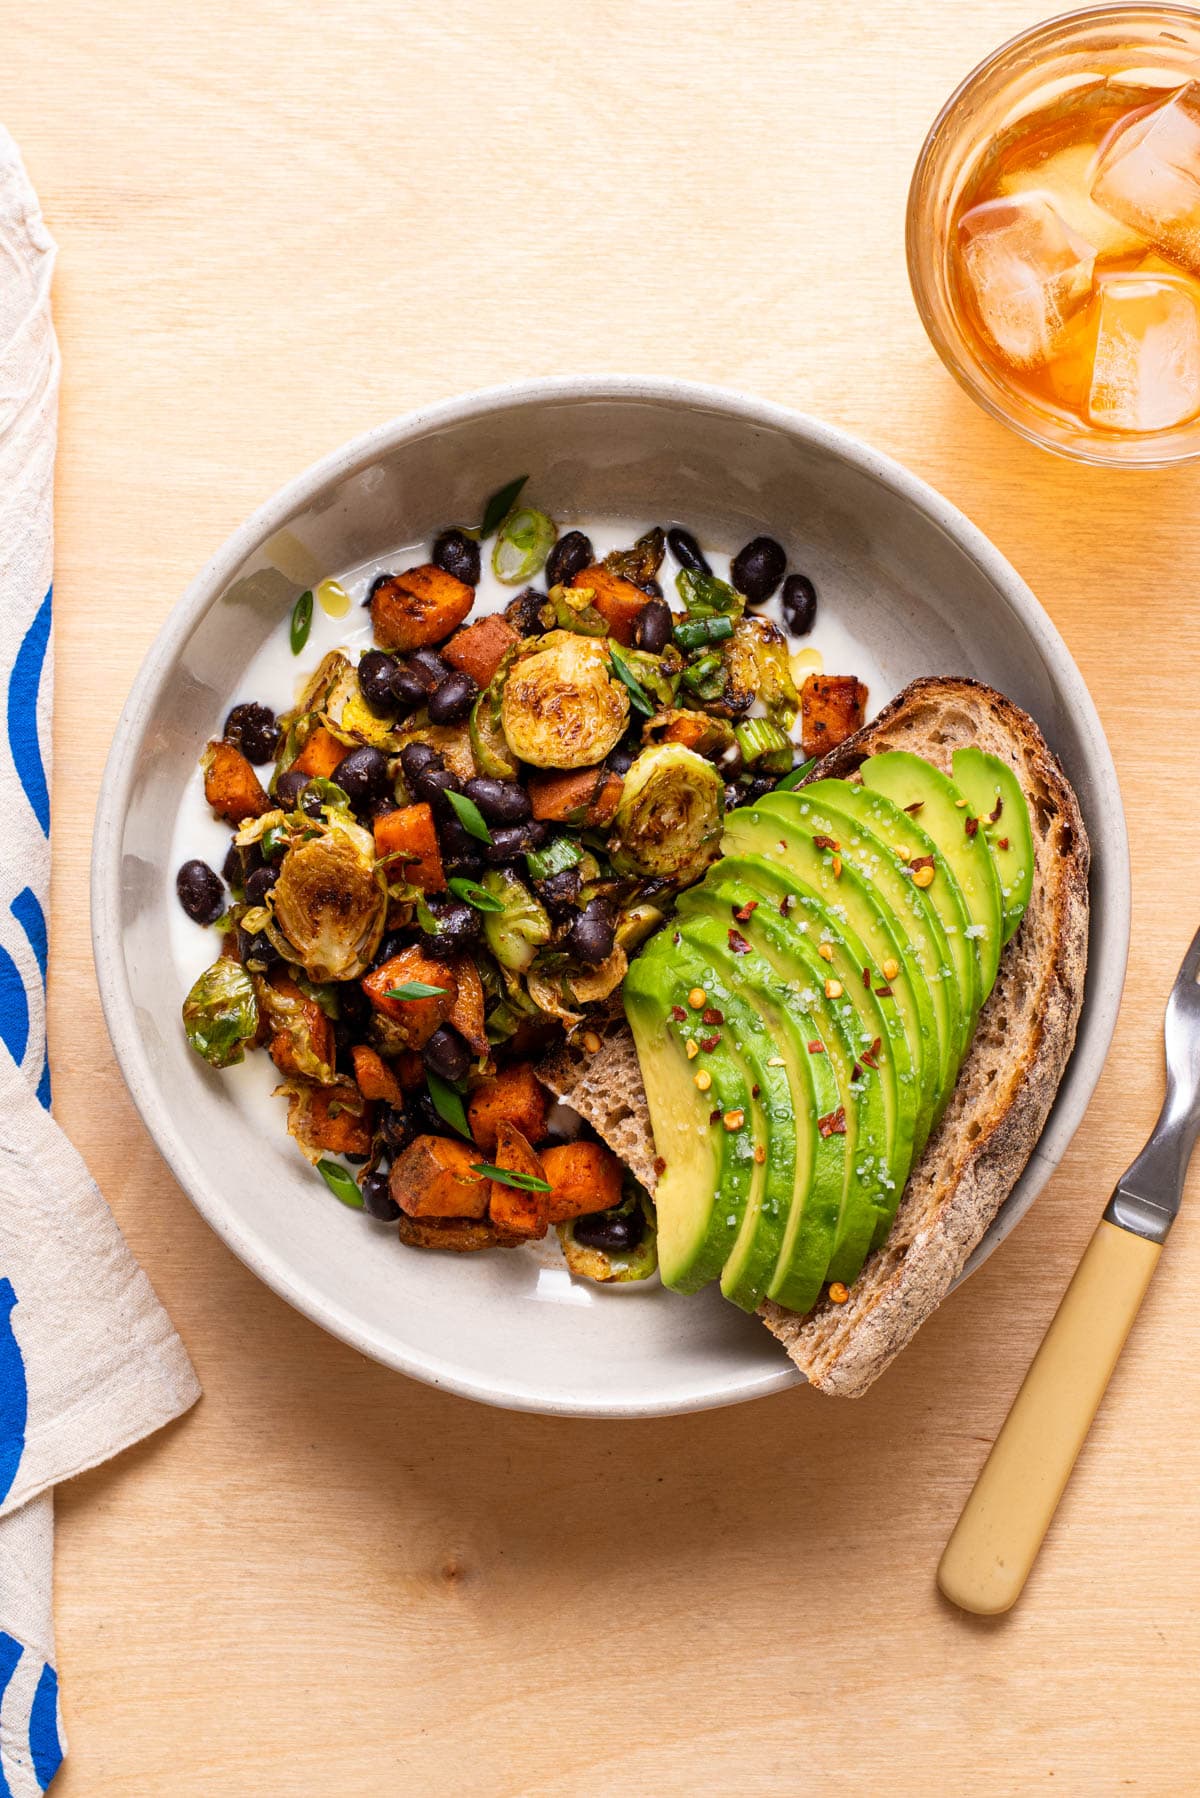 Sweet potato and Brussels sprout hash in a bowl with avocado toast.